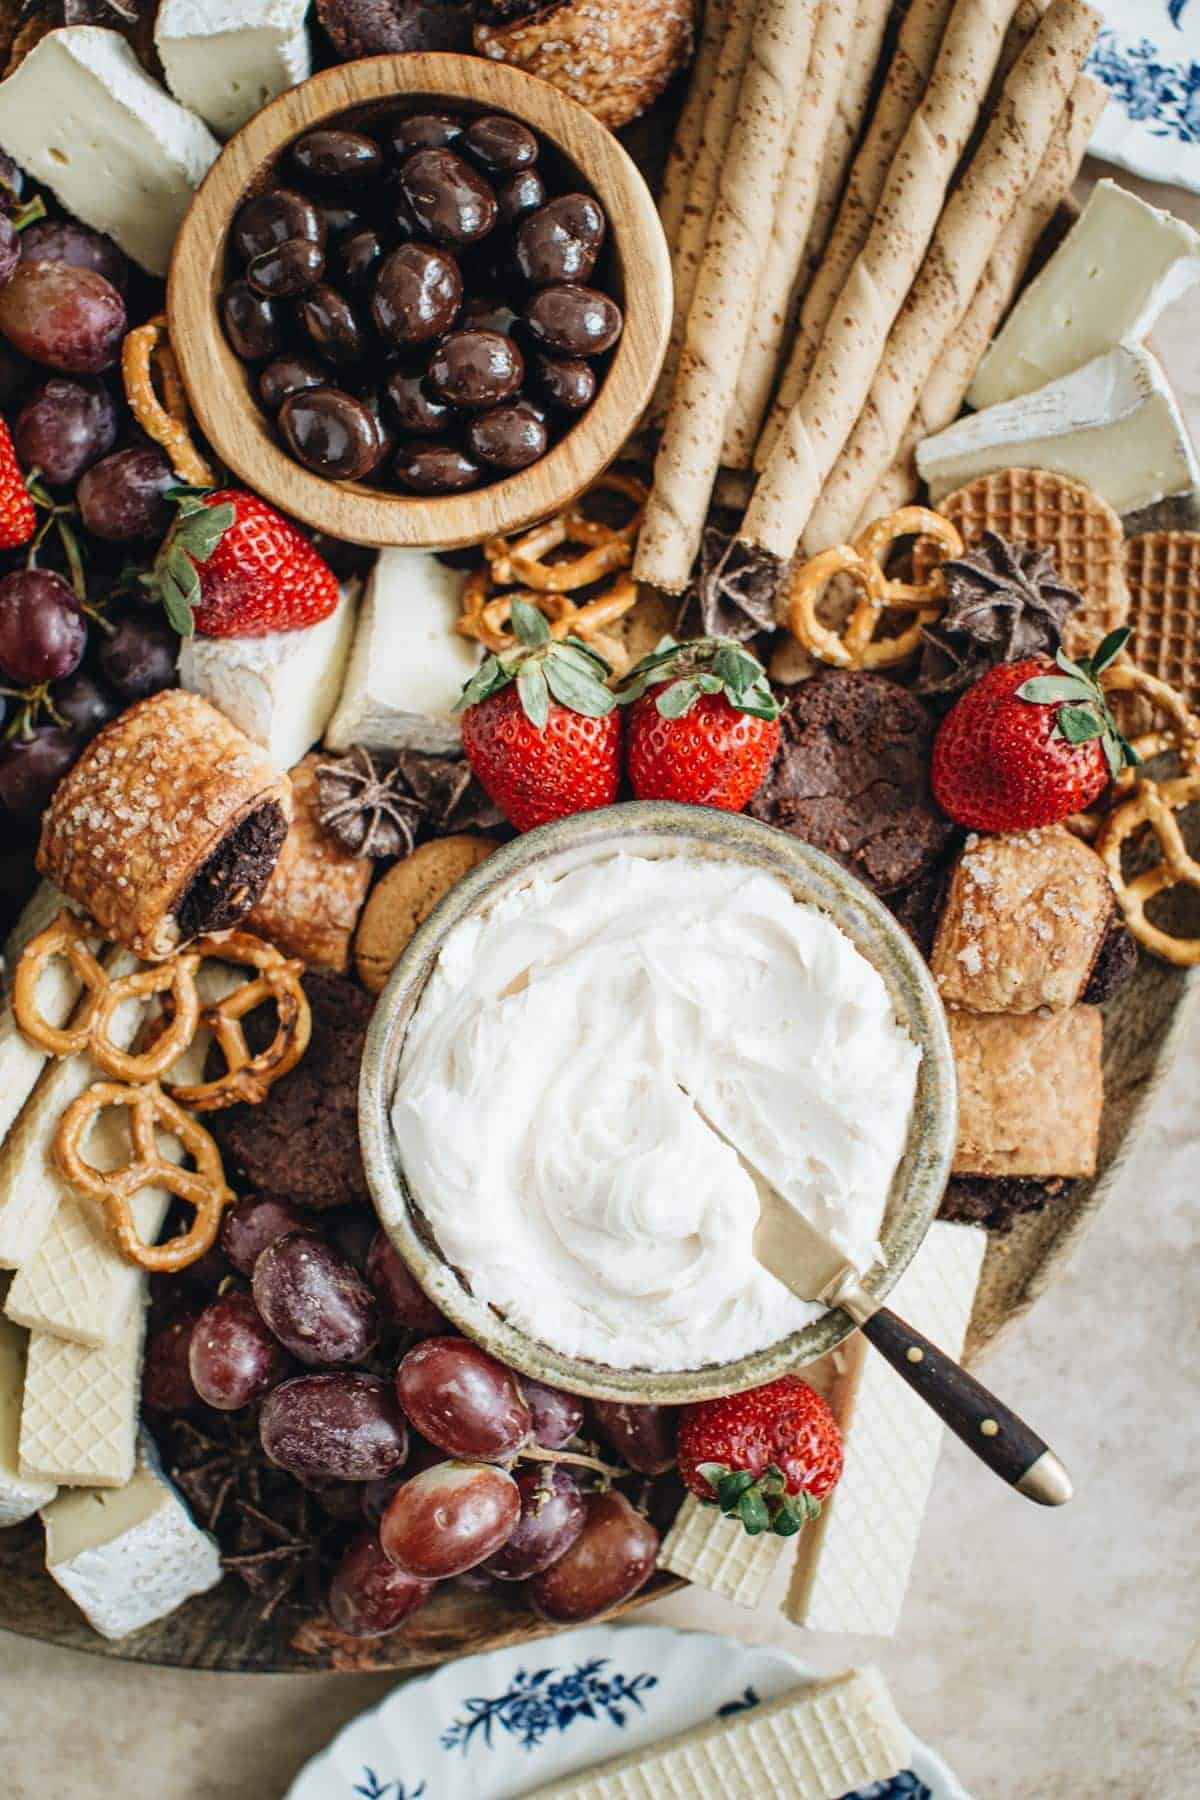 Valentines dessert charcuterie board with frosting for dip.